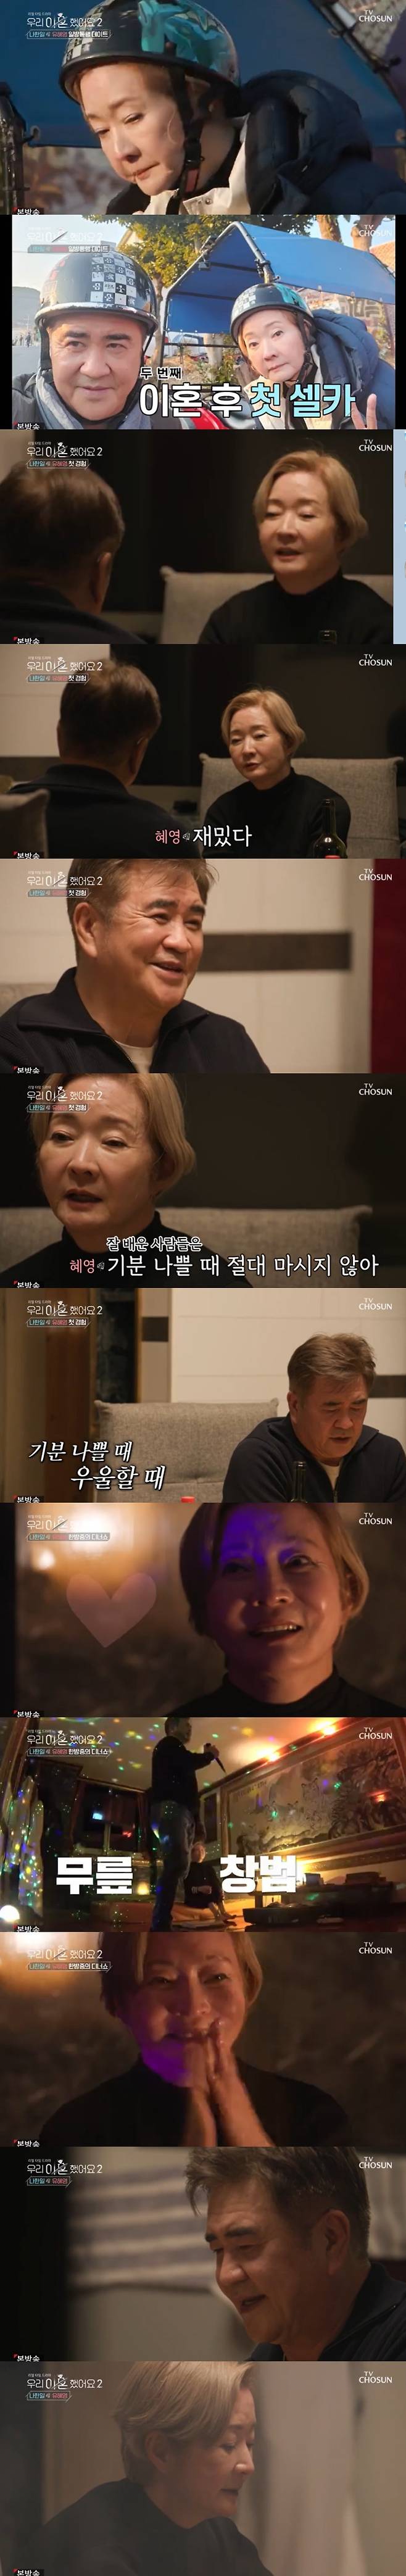 In Season 2, TV Chosun (TV CHOSUN) We Divorced, which was broadcast on the afternoon of the 15th, the second story of Nahan Il Yu Hye Young, who had two marriages and divorces, was drawn.On this day, Nahan Il showed Yu Hye Young sitting in a chair and taking a picture of his sleeping on his cell phone, saying, What would I have thought while watching these pictures? He said, If you were not sick, Yu Hye Young would have been older.Yu Hye Young said, The word seven is funny, and said frankly, I like to say seven, but I am old (in the end), and added, We can not stop aging. Yu Hye Young tells Nahan Il about wearing hanbok at the first wedding ceremony and said, I have not worn Wedding Dress like others. Would you like to wear Wedding Dress?and mentioned the Remind Wedding. So Nahan was embarrassed and said, Its a bit of a shame.Na Han-il said, Opportunity should have been worn then when we got the second combination, Yu Hye Young said, I remarried to do it again, but you were the same, you were unchanged.Nahan Il recalled the past when he signed an autograph to pay investors for the wrong business, saying, I signed it because I would not hurt you if I did not sign (investors).Yu Hye Young said, You did not talk to me without discussing it, and you did not say anything, and you were in jail because you owed the sign.On the day of the broadcast, Yu Hye Young said that he had already noticed that Nahan Il was interested in him before his first marriage.I had a lot of outdoors when I was shooting dramas, I seemed interested in me, but I told him to stay in my sight, he said.If I didnt confess anything urgently, I would have been good, he added.After the schedule, the two men had a good time drinking wine, and Yu Hye Young naturally dumped the jerky that Nahan Il had bought into the trash.The jerky that Nahan Il bought was a puppy jerky. The three MCs who saw it were too natural to throw away.Yu Hye Young said, When a person who can not drink alcohol tries to drink wine, he said, It is fun because a person who can not drink alcohol. When I married, I drank when I was depressed.The cause was me, Nahan said. So (Yu Hye Young) drank alcohol and borrowed alcohol and talked fiercely.Nahan said that Yu Hye Young drank at the time of his marriage and said, I did not like it, I accepted it.Yu Hye Young replied, I should not have given it a little, but I pretend not to drink.MC Kim Sae-rom, who saw it in the studio, said, When the words were exchanged, the flames would have sprung.The two later toasted with wine glasses; Yu Hye Young concluded the second day, saying its just funny.